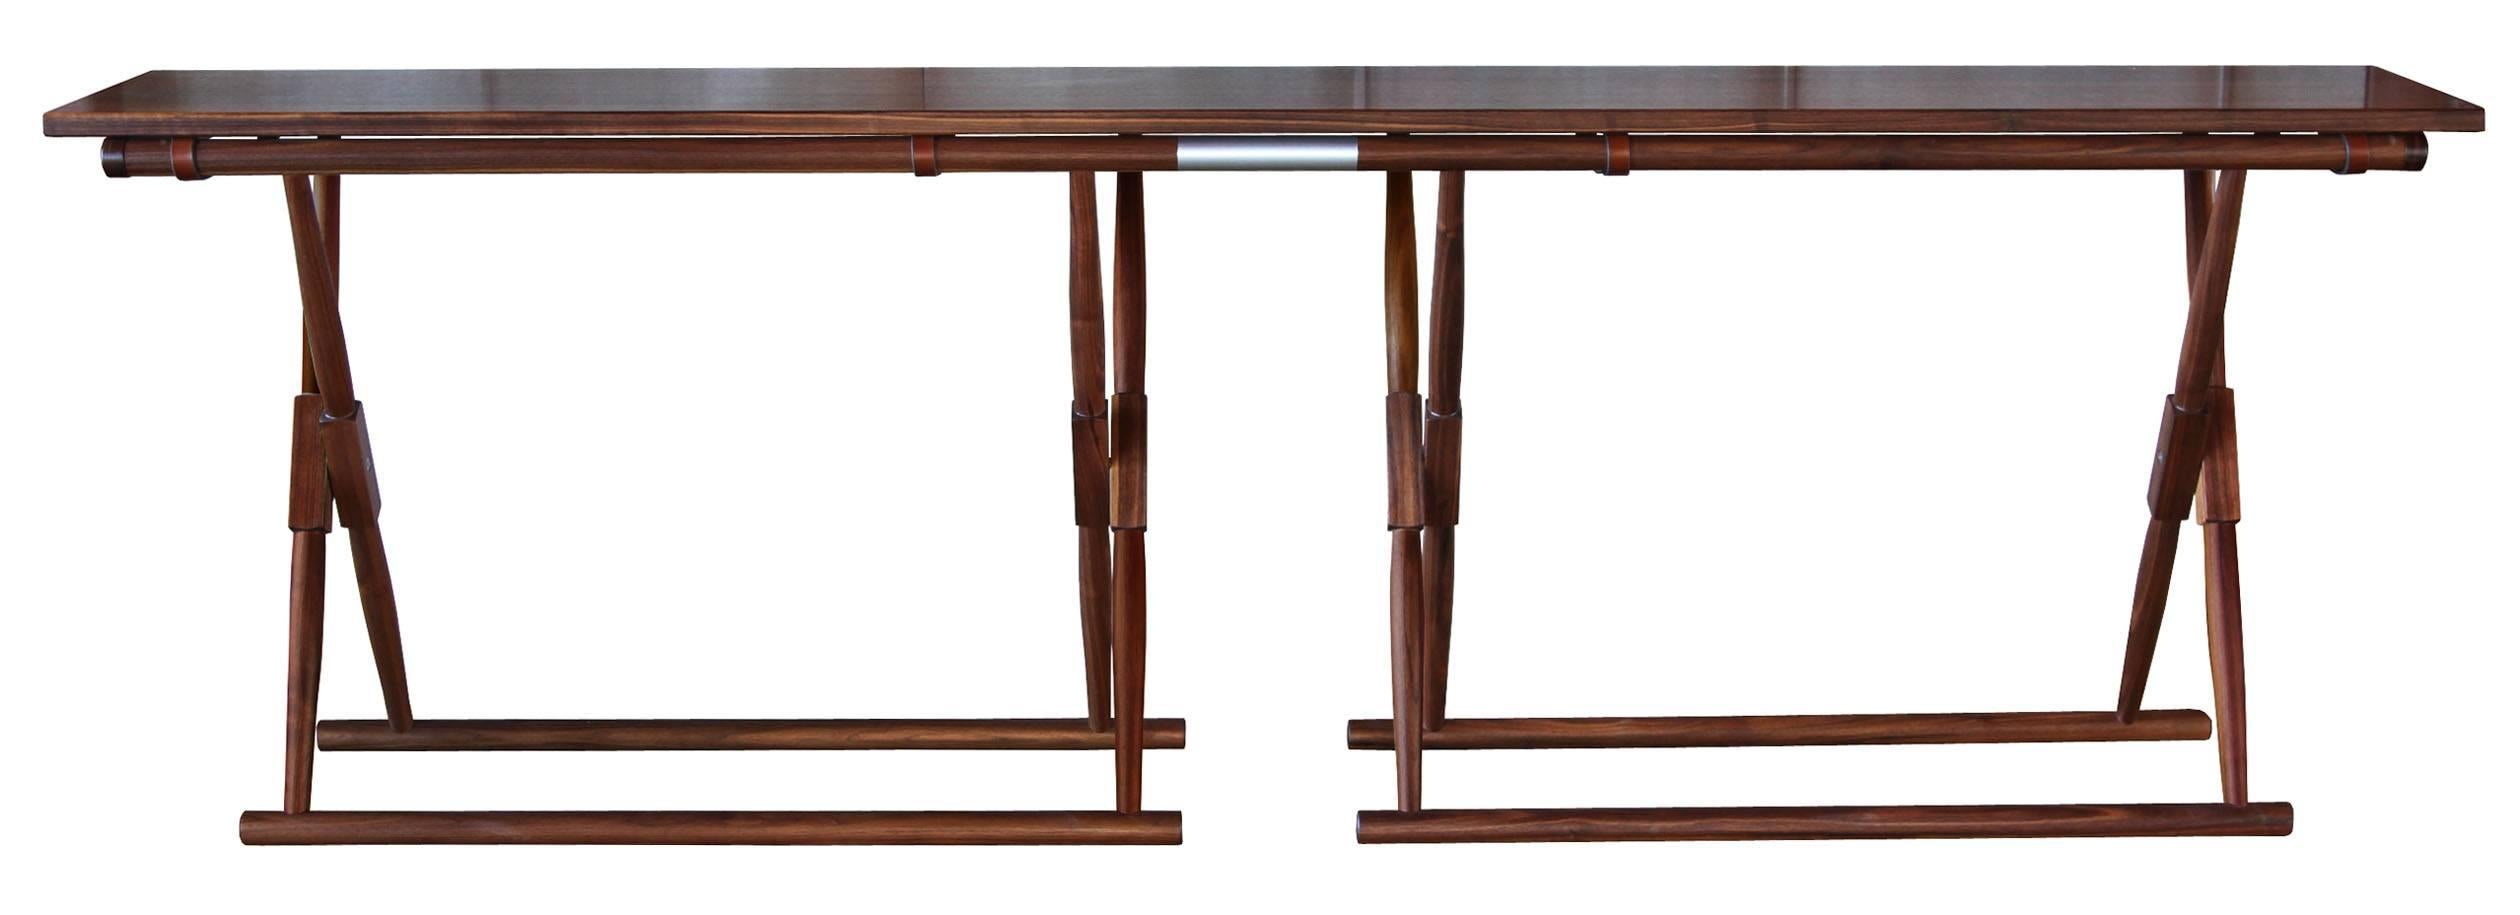 The Matthiessen console in oiled walnut with multiple dark chocolate English bridle leather straps that wrap around each bottom length of the console and buckle underneath for a handsome underside detail.

The modern campaign collection by Richard